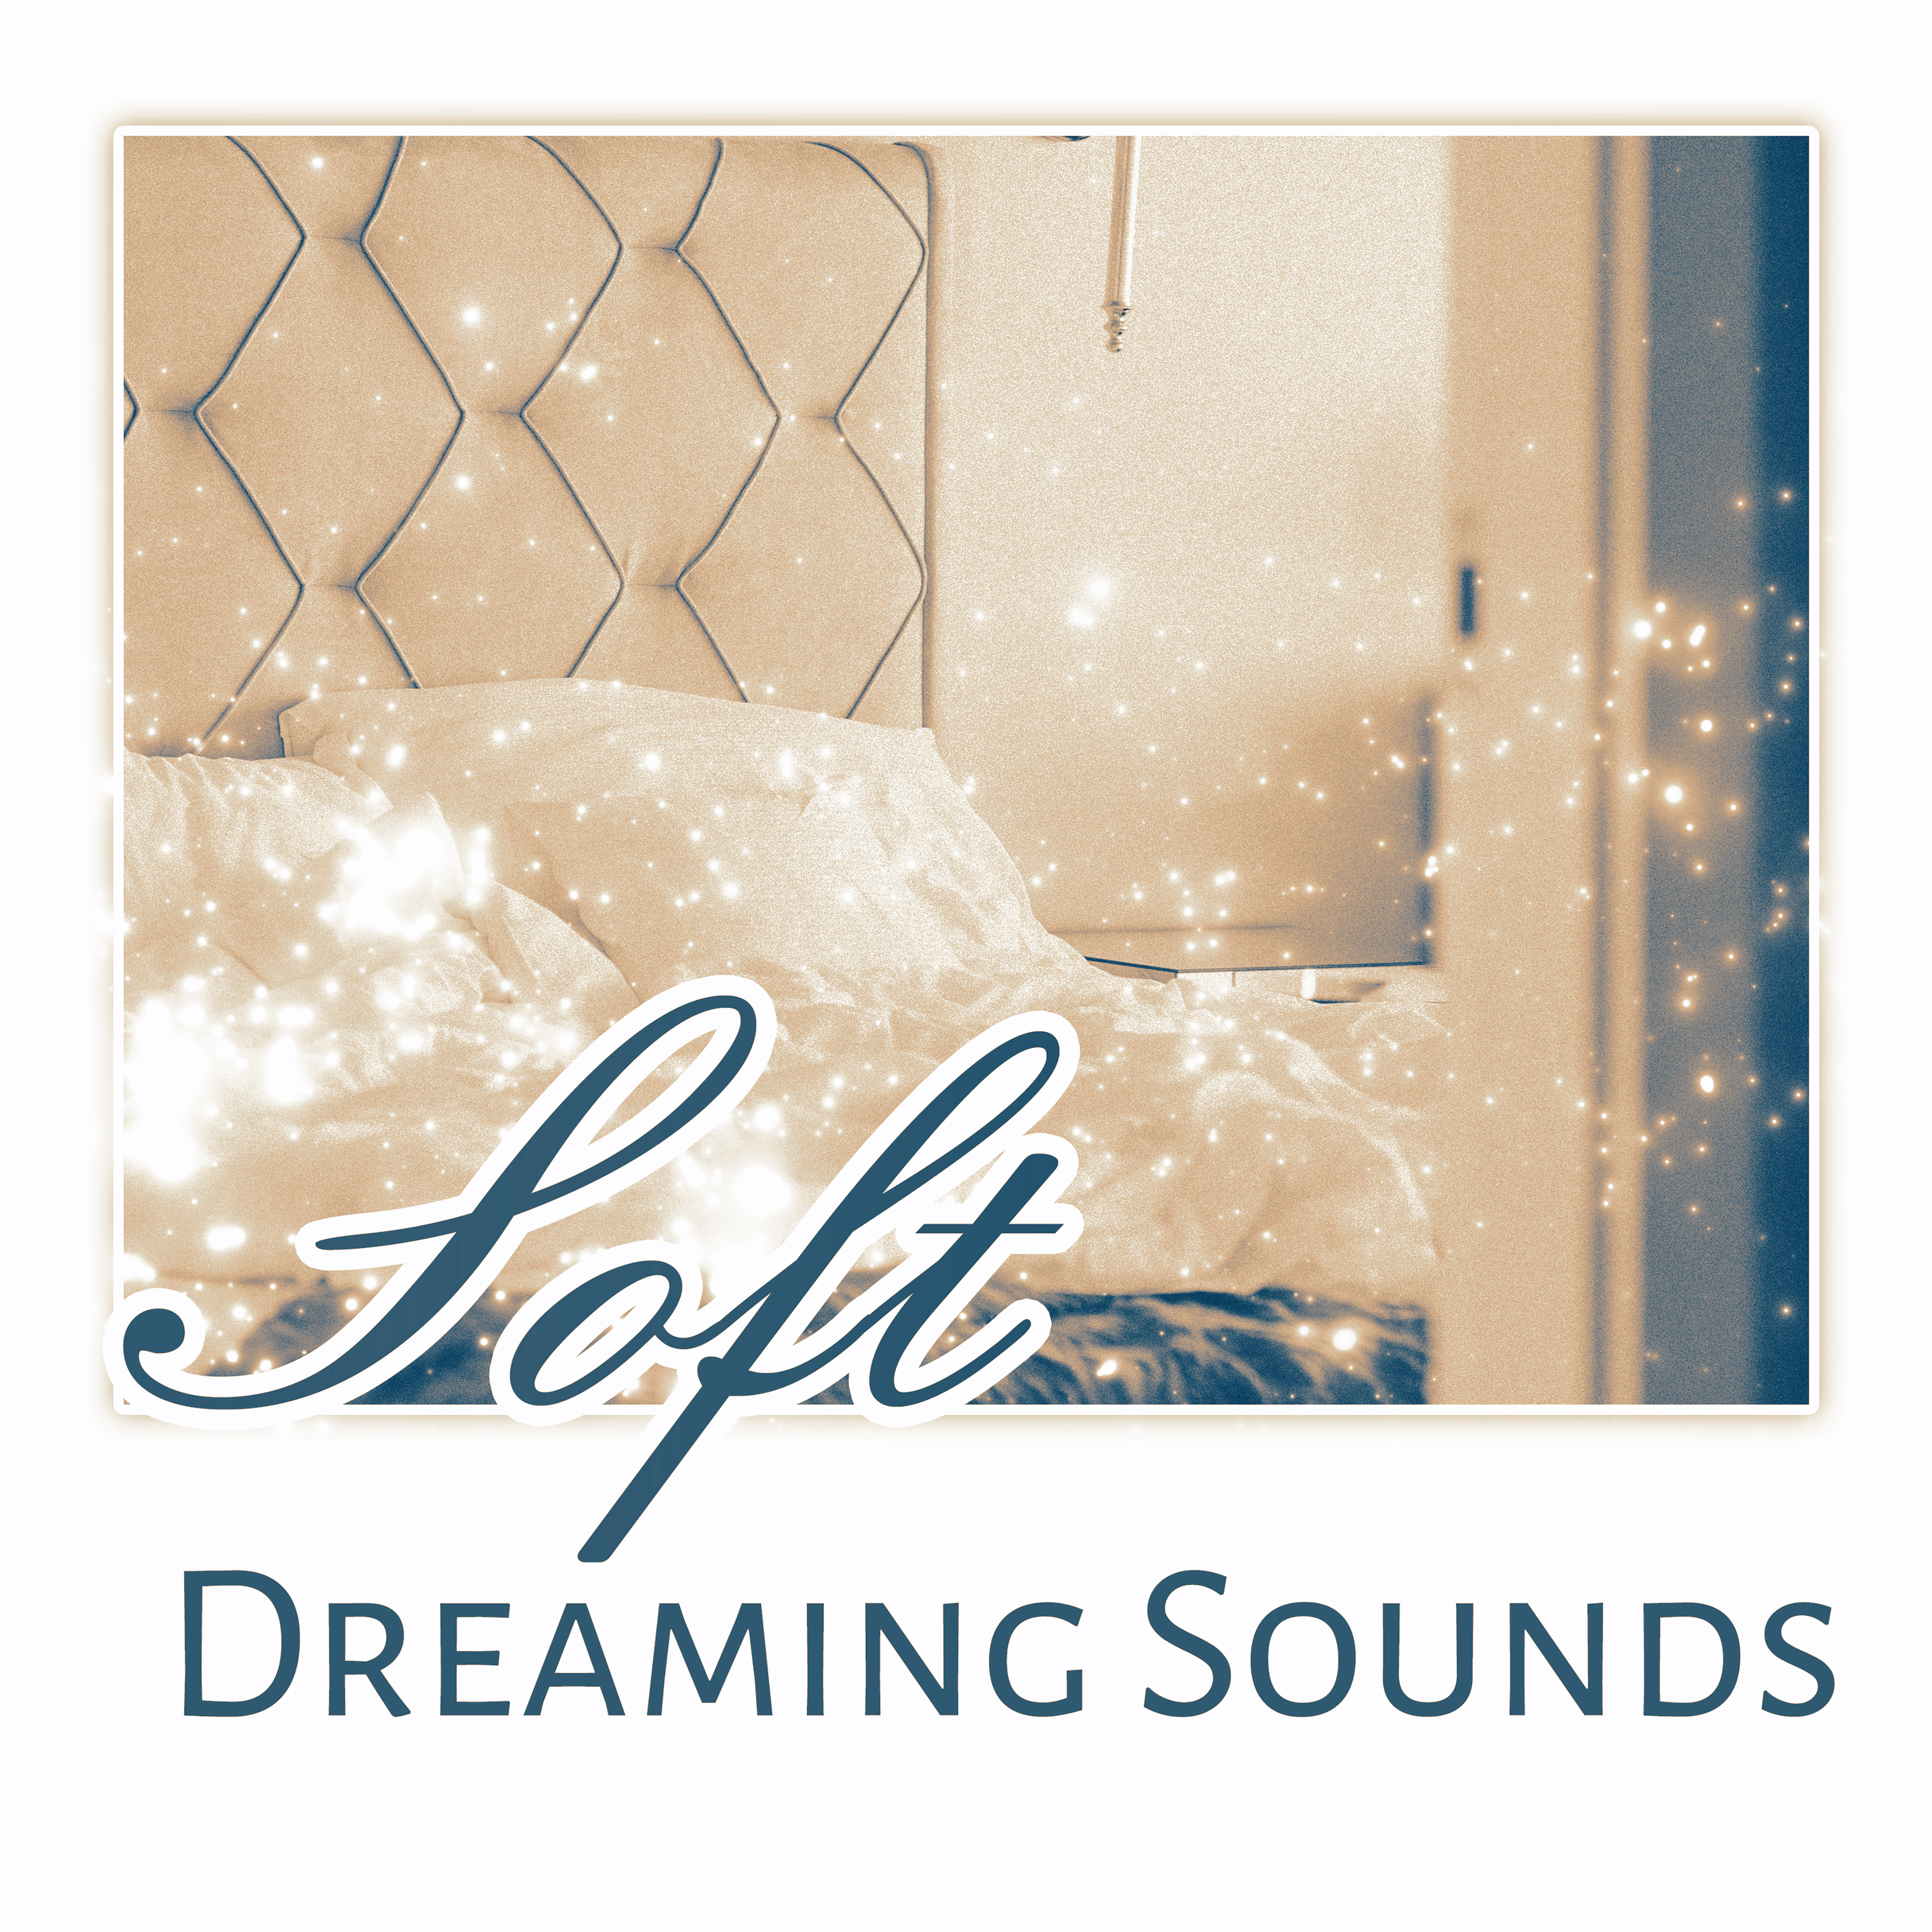 Soft Dreaming Sounds  Relaxing Music for Night, Evening Relaxation, Sleep Well, New Age Dreams